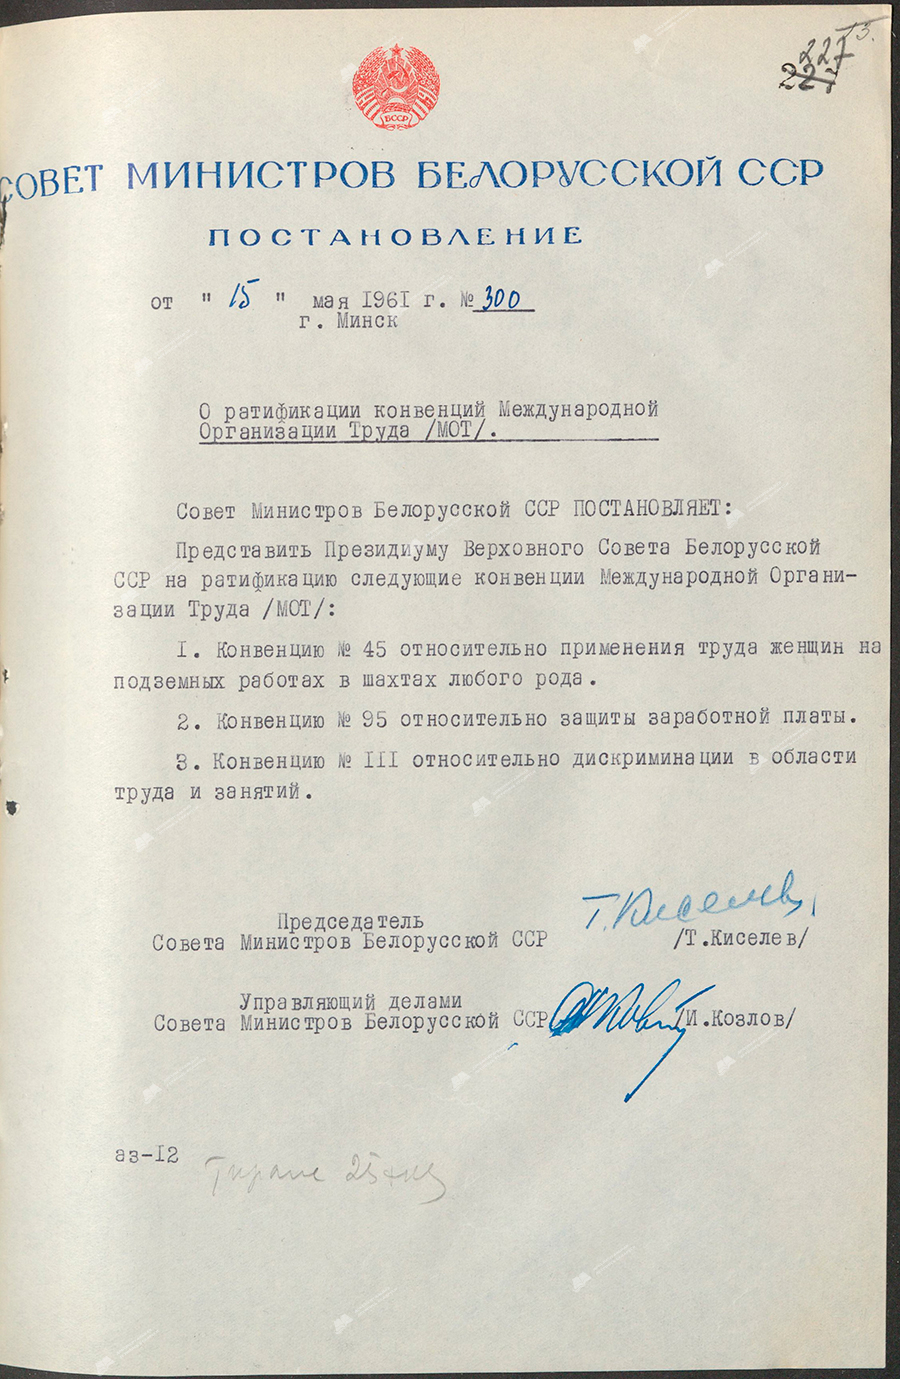 Resolution No. 300 of the Council of Ministers of the BSSR «On the ratification of the conventions of the International Labor Organization (ILO)»-стр. 0